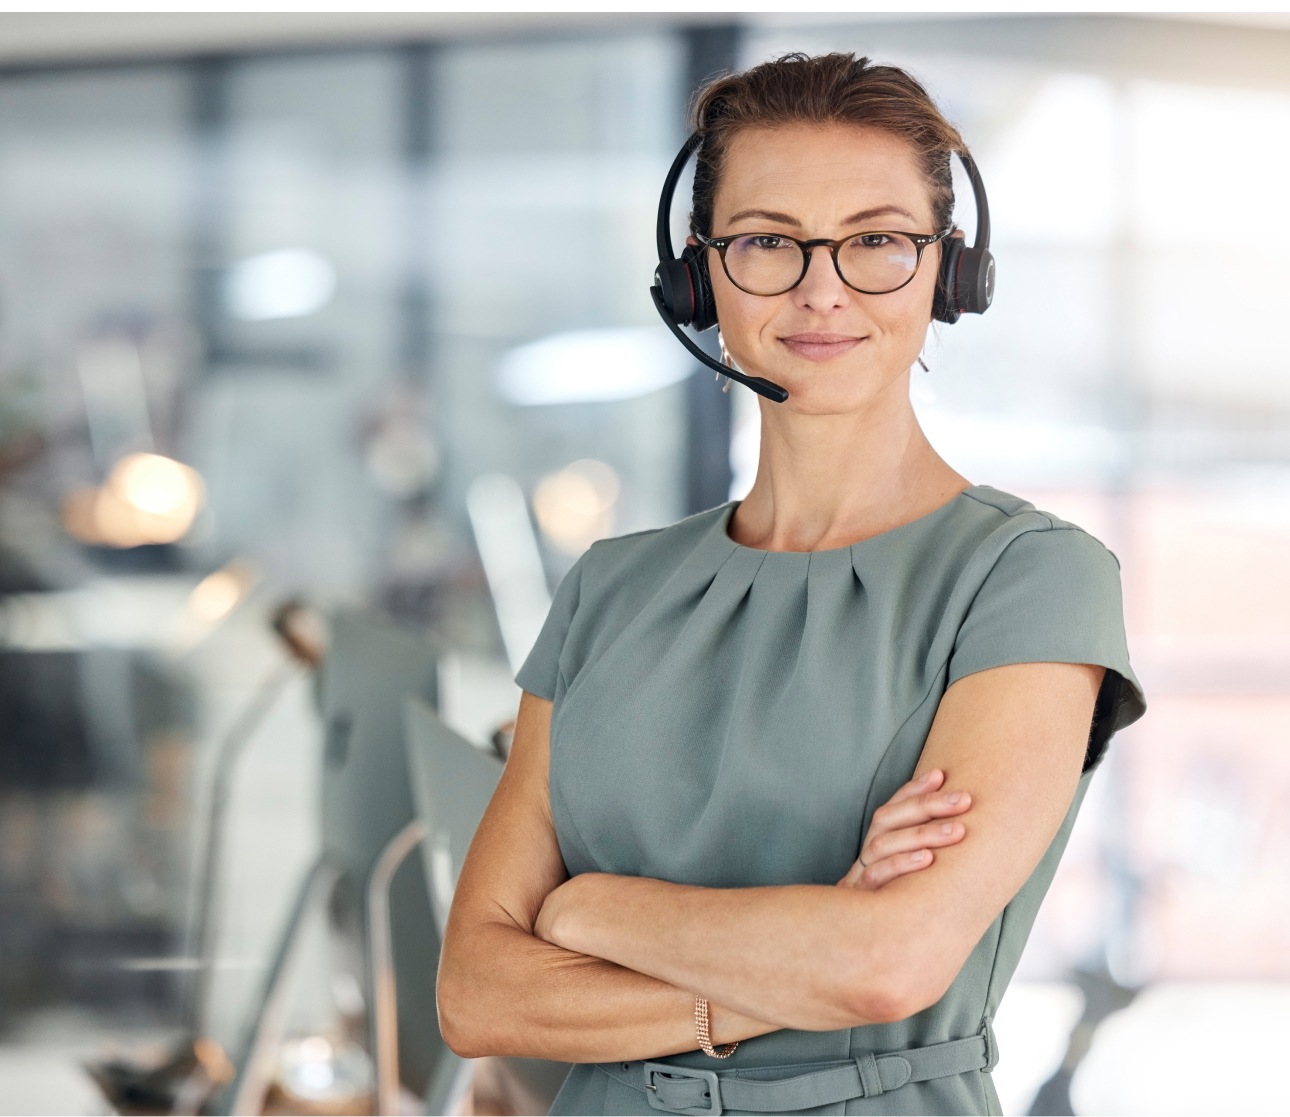 A woman wearing a headset and glasses stands in front of a desk, ready to assist with customer service or technical support.